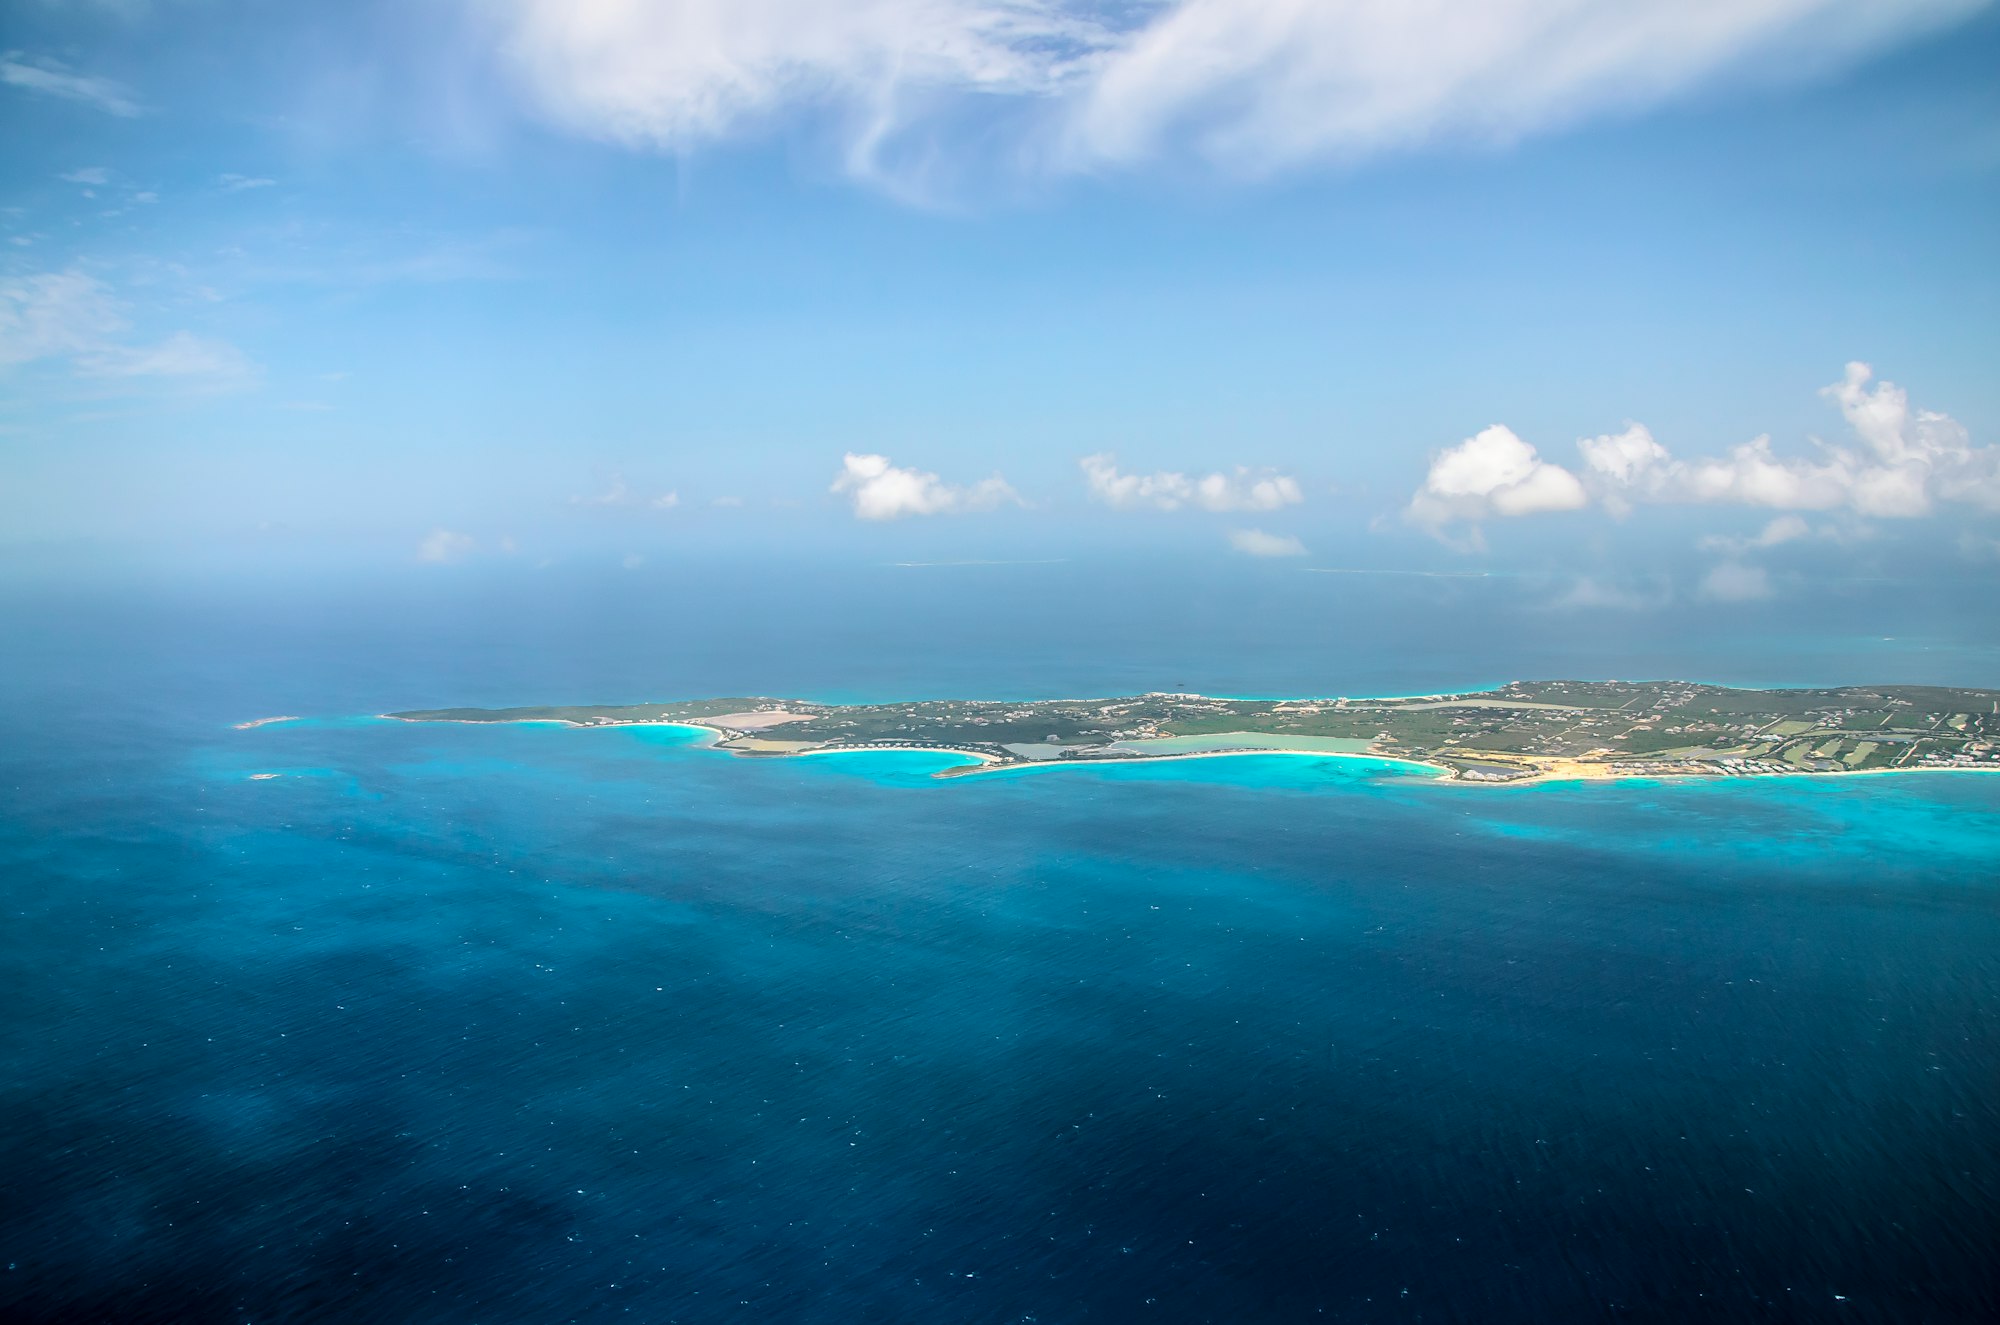 Ariel view of Anguilla island with surrounding Caribbean ocean